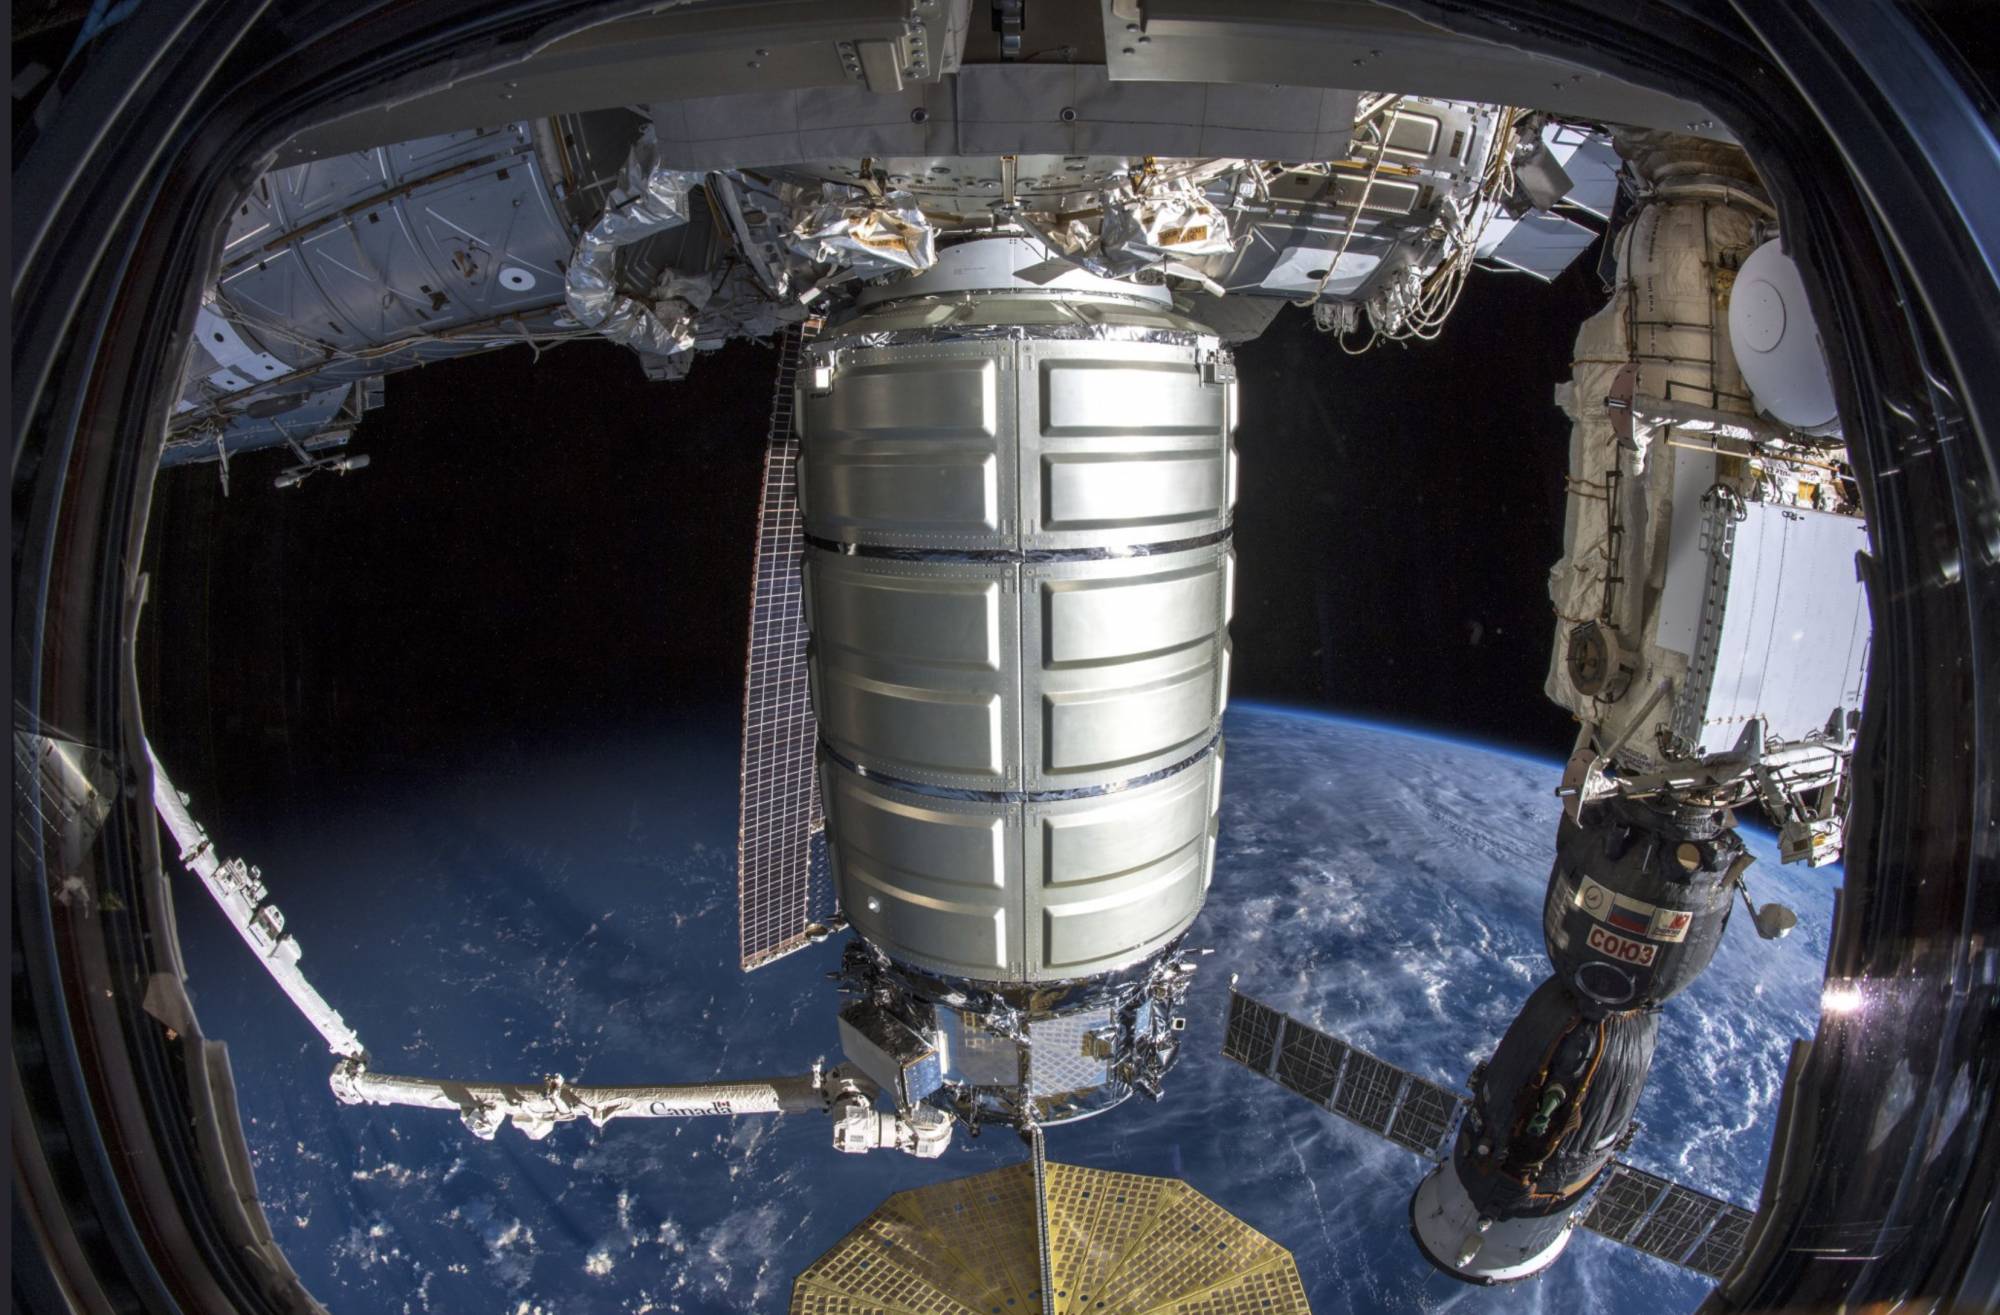 In this image provided by NASA, a commercial shipment arrives at the International Space Station on Monday, Nov. 19, 2018. Astronaut Serena Aunon-Chancellor used the space station’s robot arm to grab Northrop Grumman’s capsule. It’s named after Apollo 16 moonwalker and the first space shuttle commander John Young, who died in January. (Alexander Gerst/European Space Agency, NASA via AP)